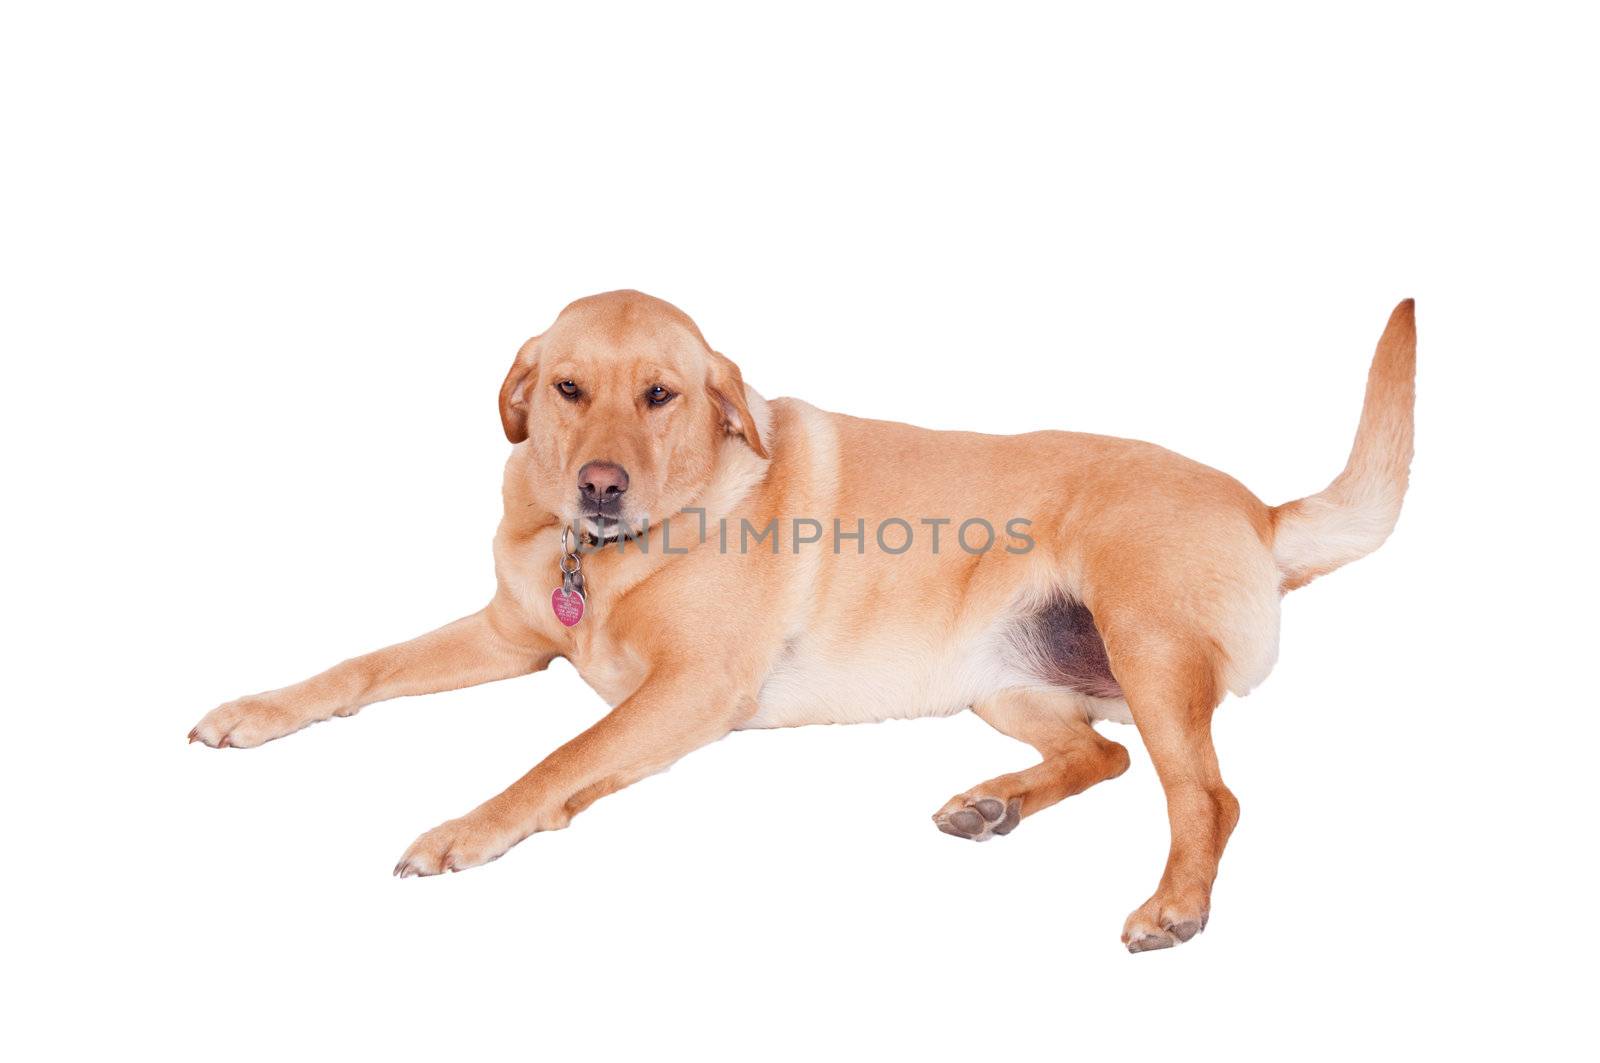 Dogs at rest on a white background